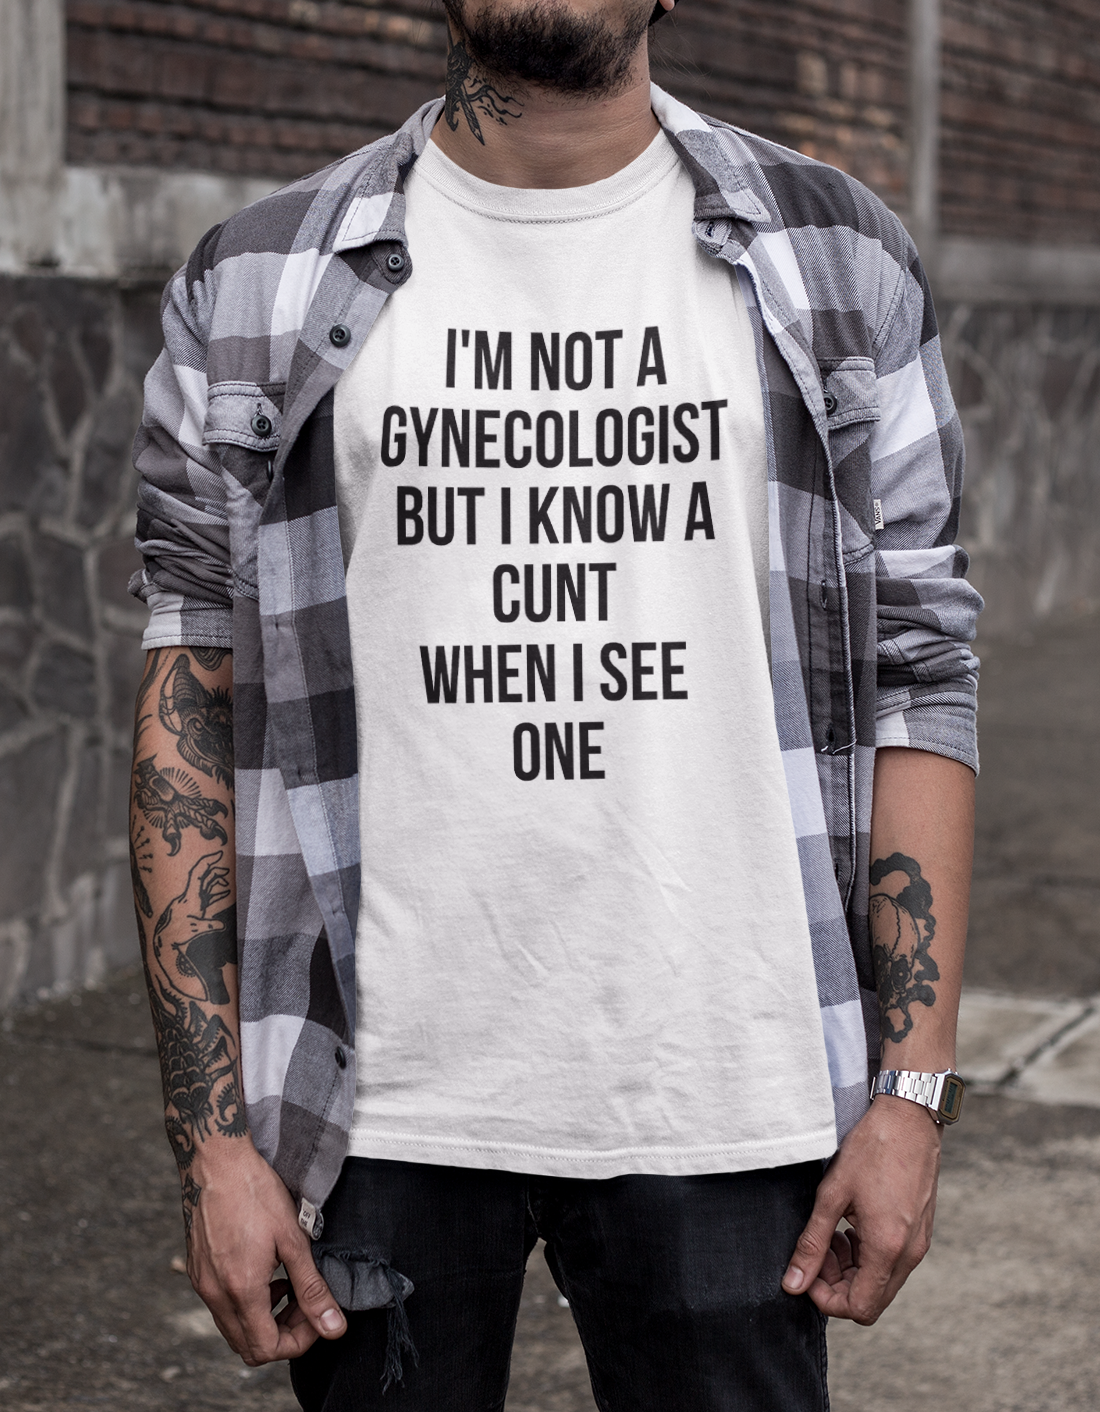 I'm not a gynecologist but I know a cunt when I see one T-shirt - Urbantshirts.co.uk